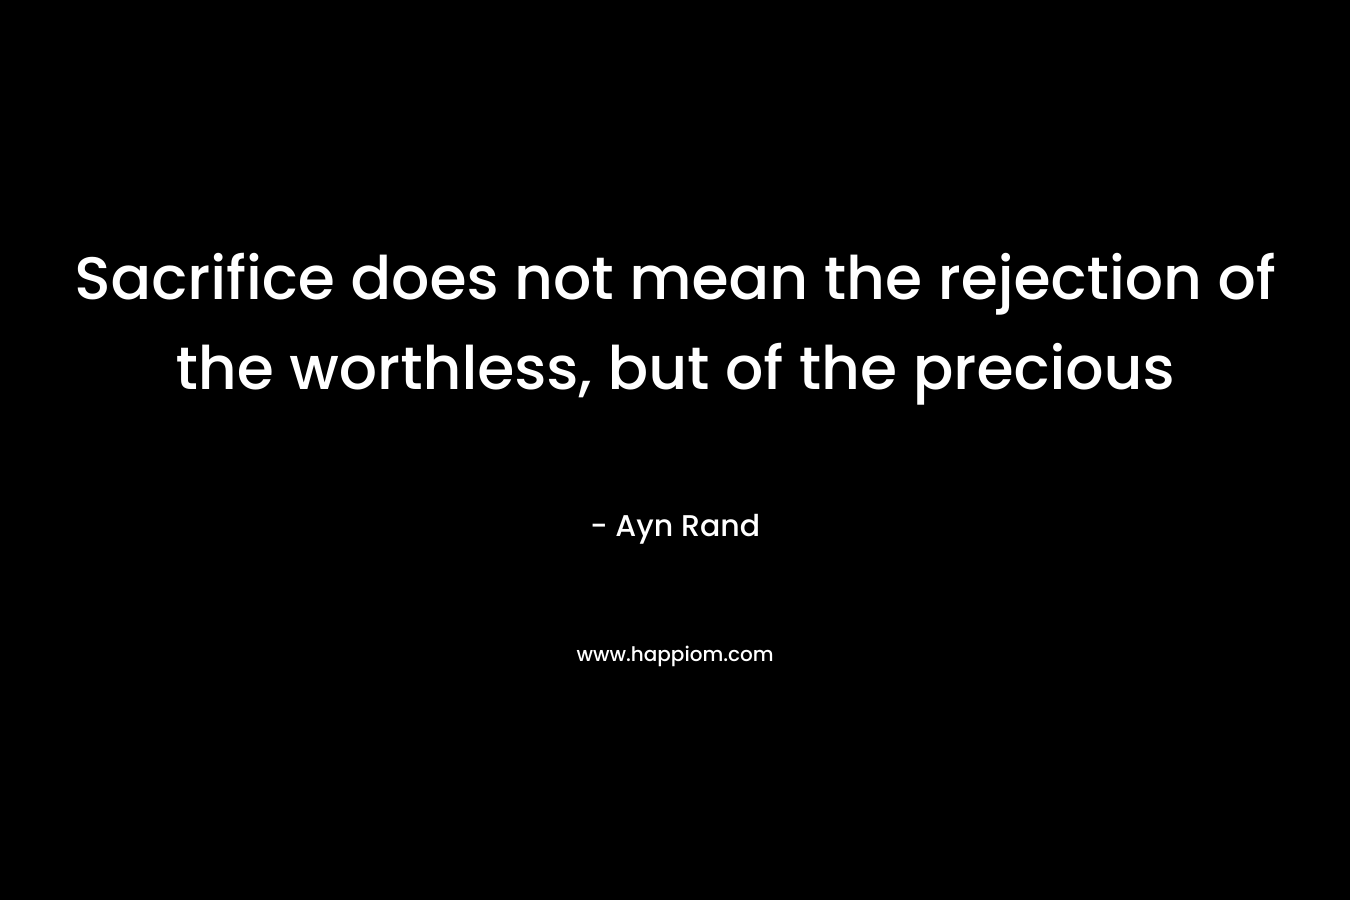 Sacrifice does not mean the rejection of the worthless, but of the precious – Ayn Rand